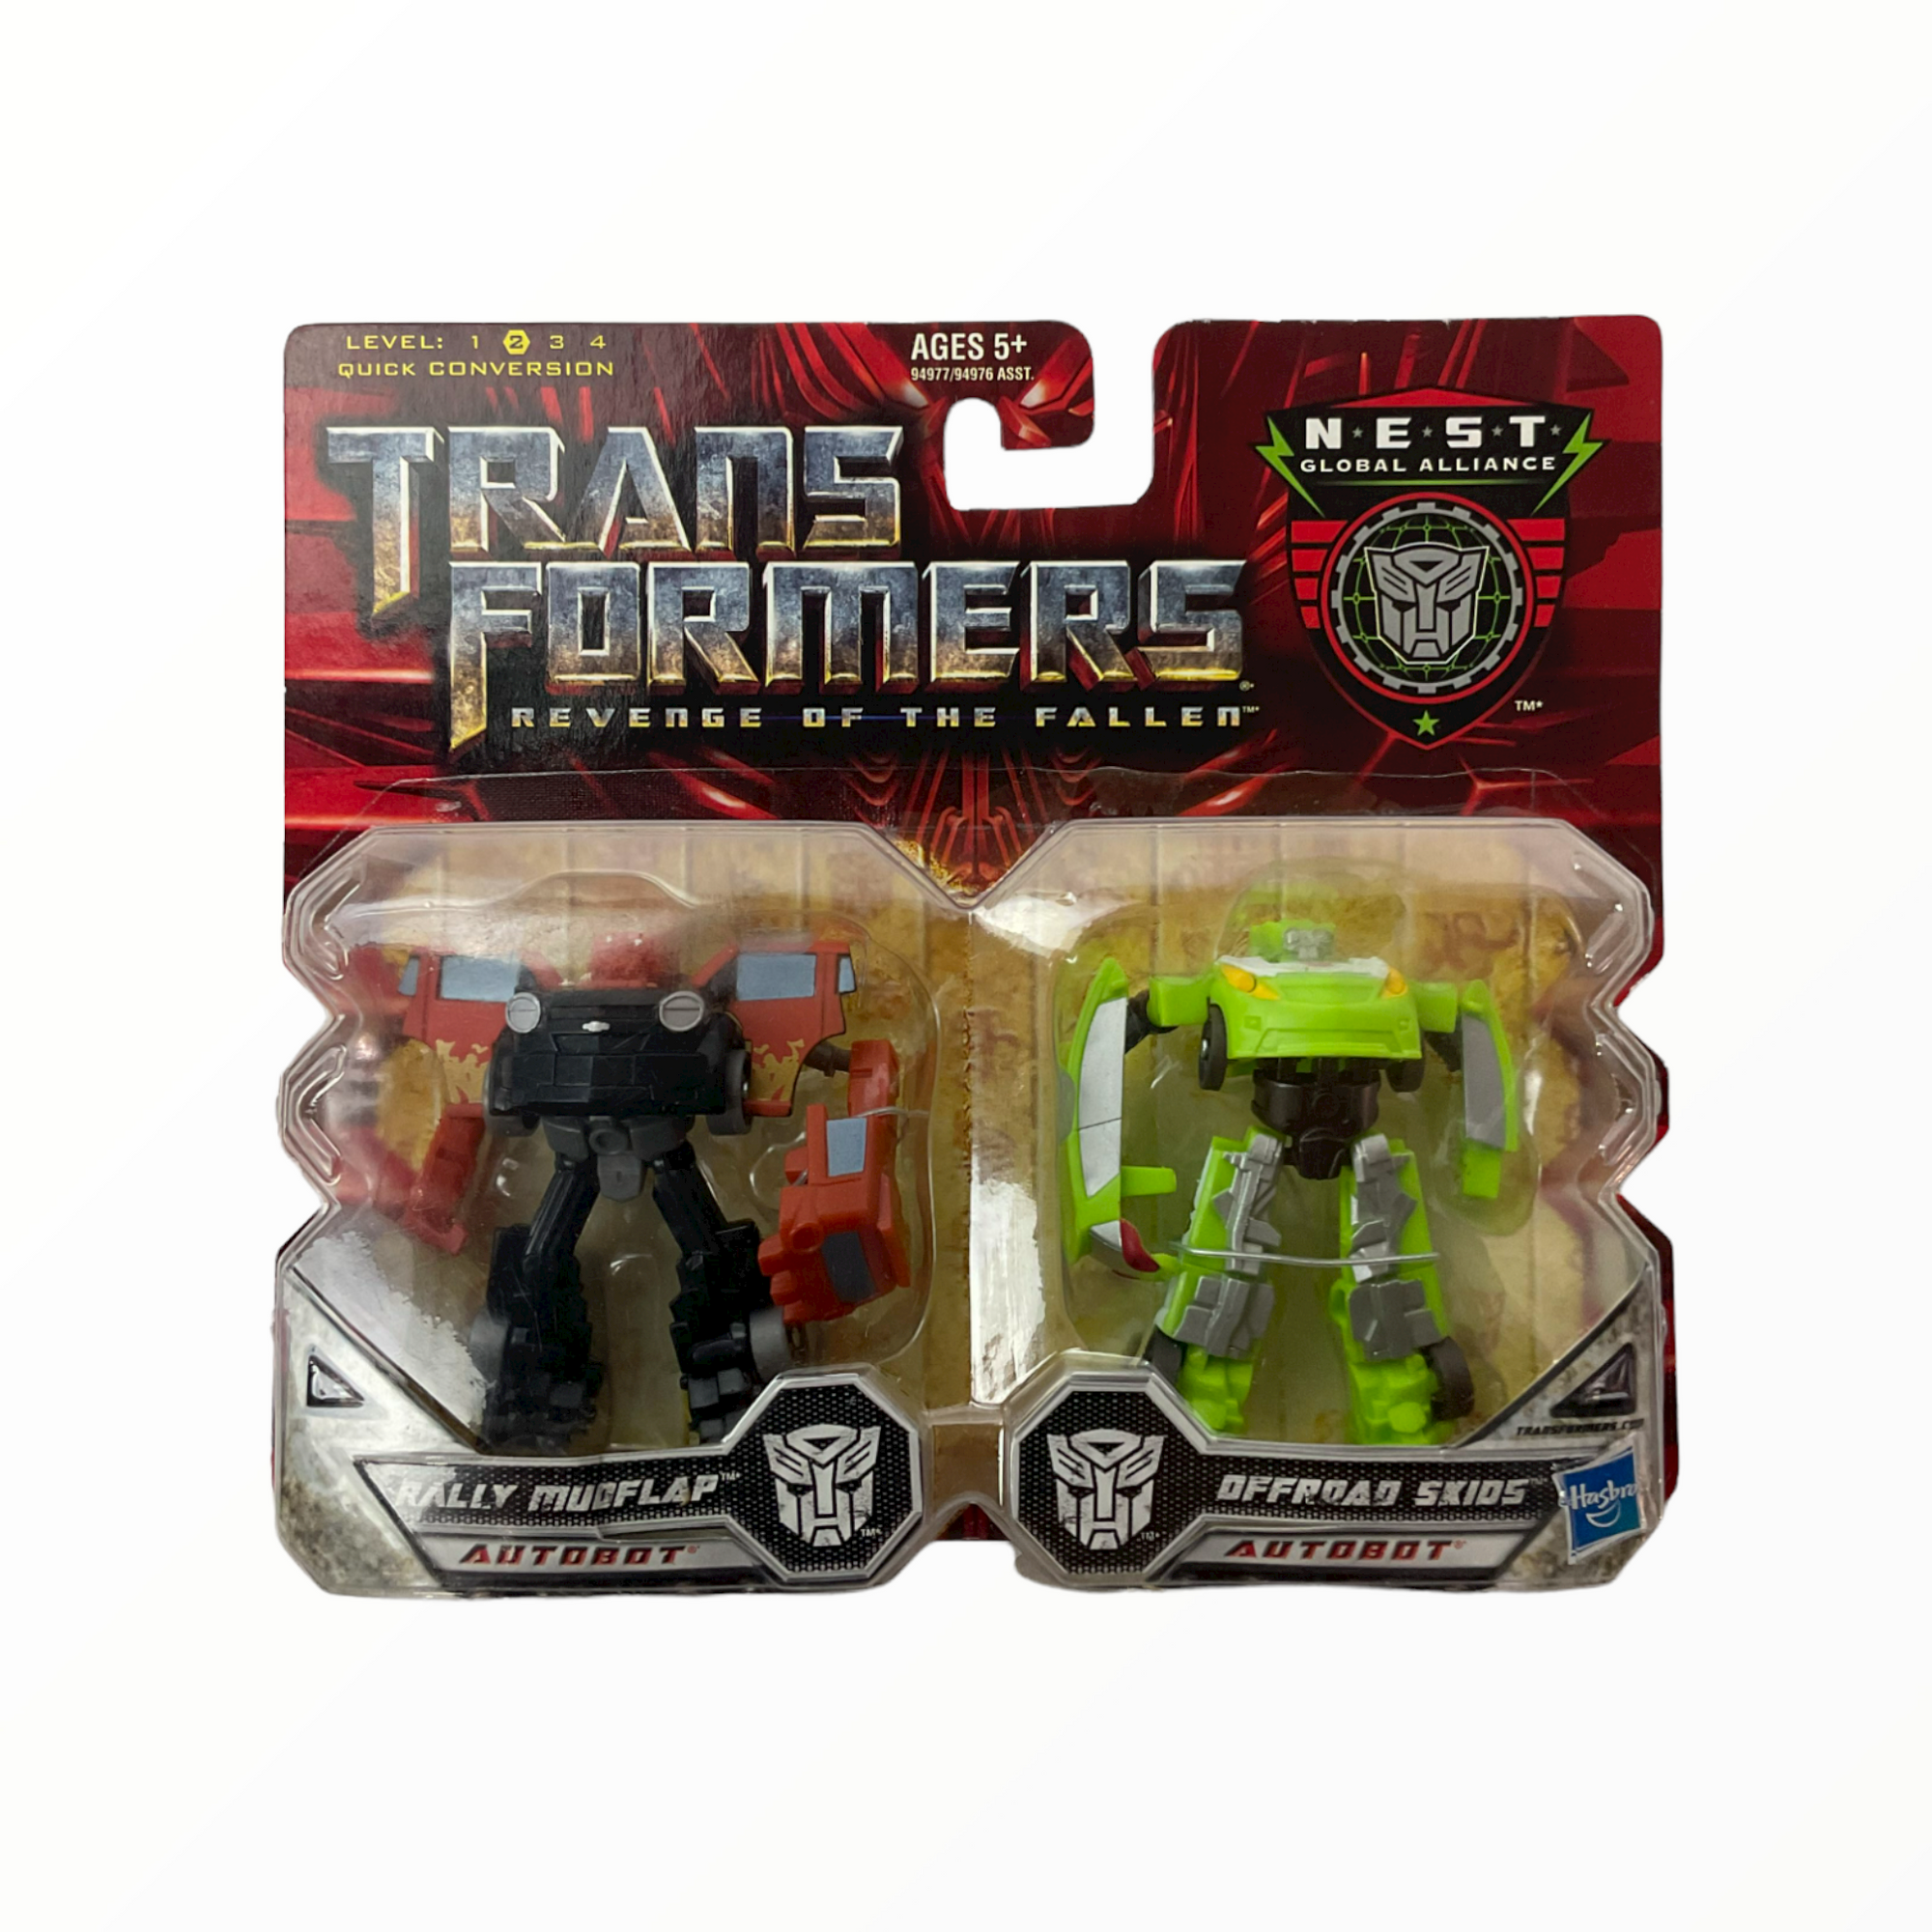 Transformers 2 Exclusive Global Alliance 2 Pack Rally Mudflap & Offroad Skids